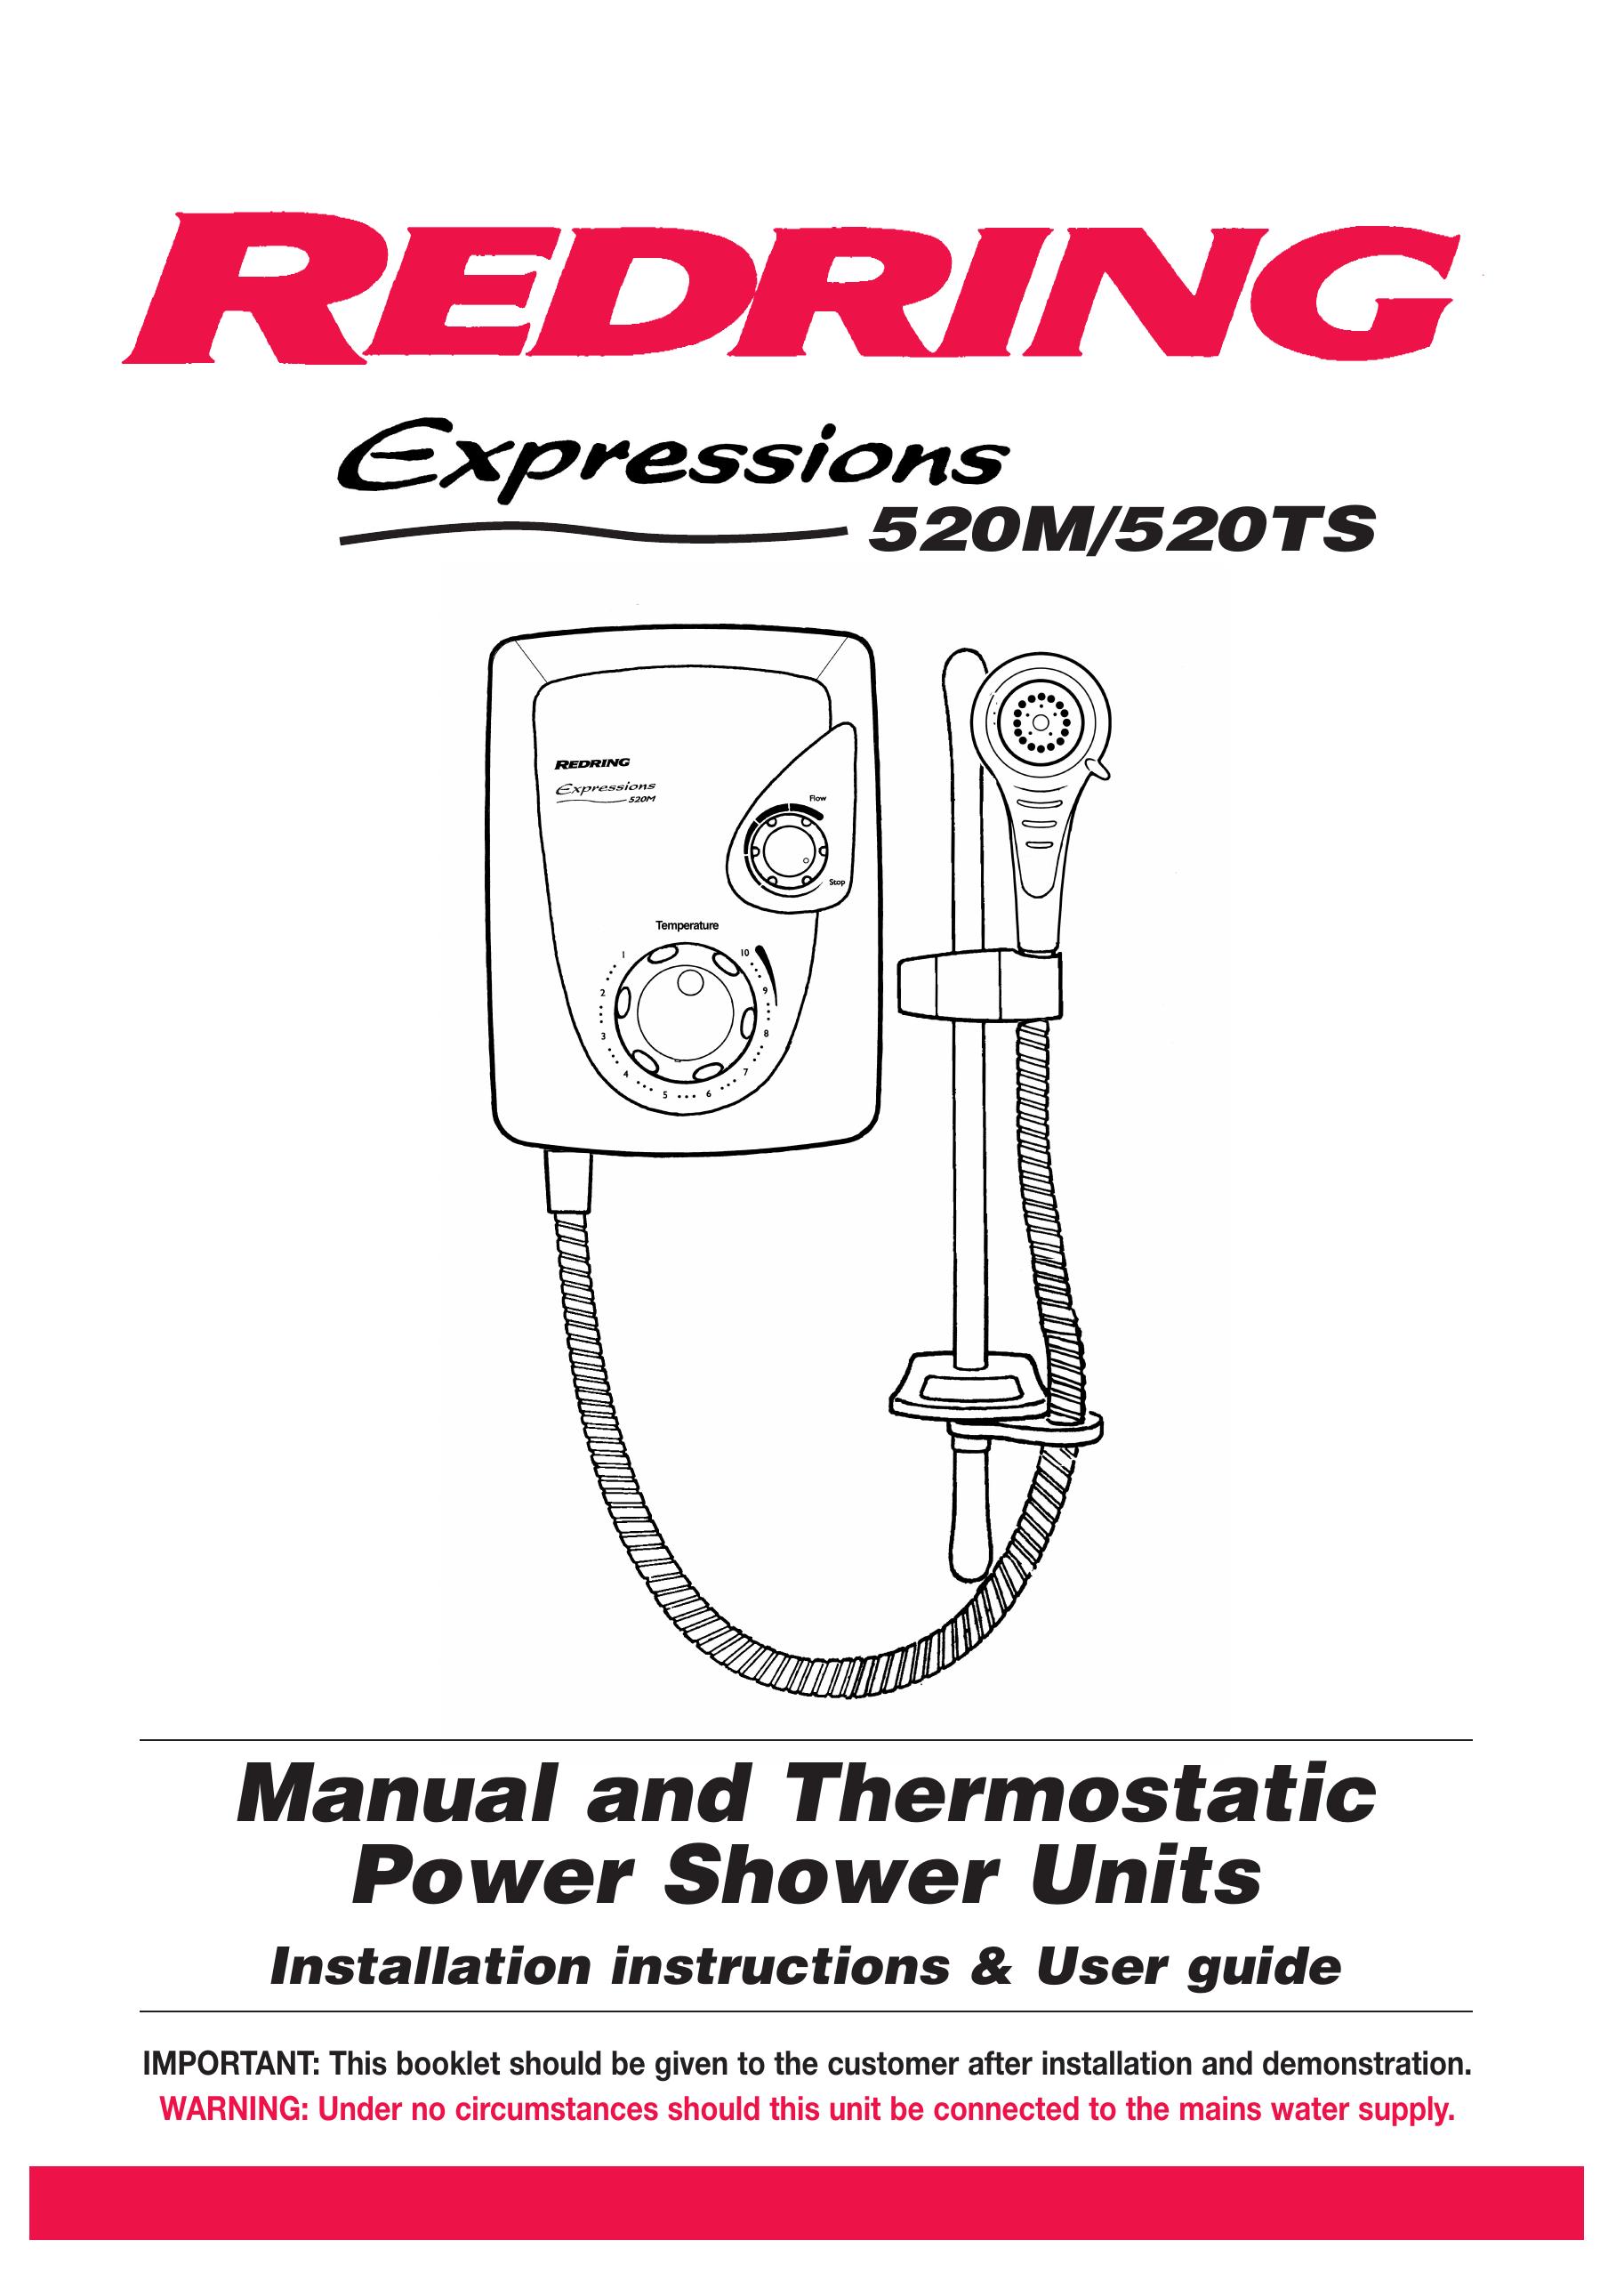 Redring 520M/520TS Outdoor Shower User Manual